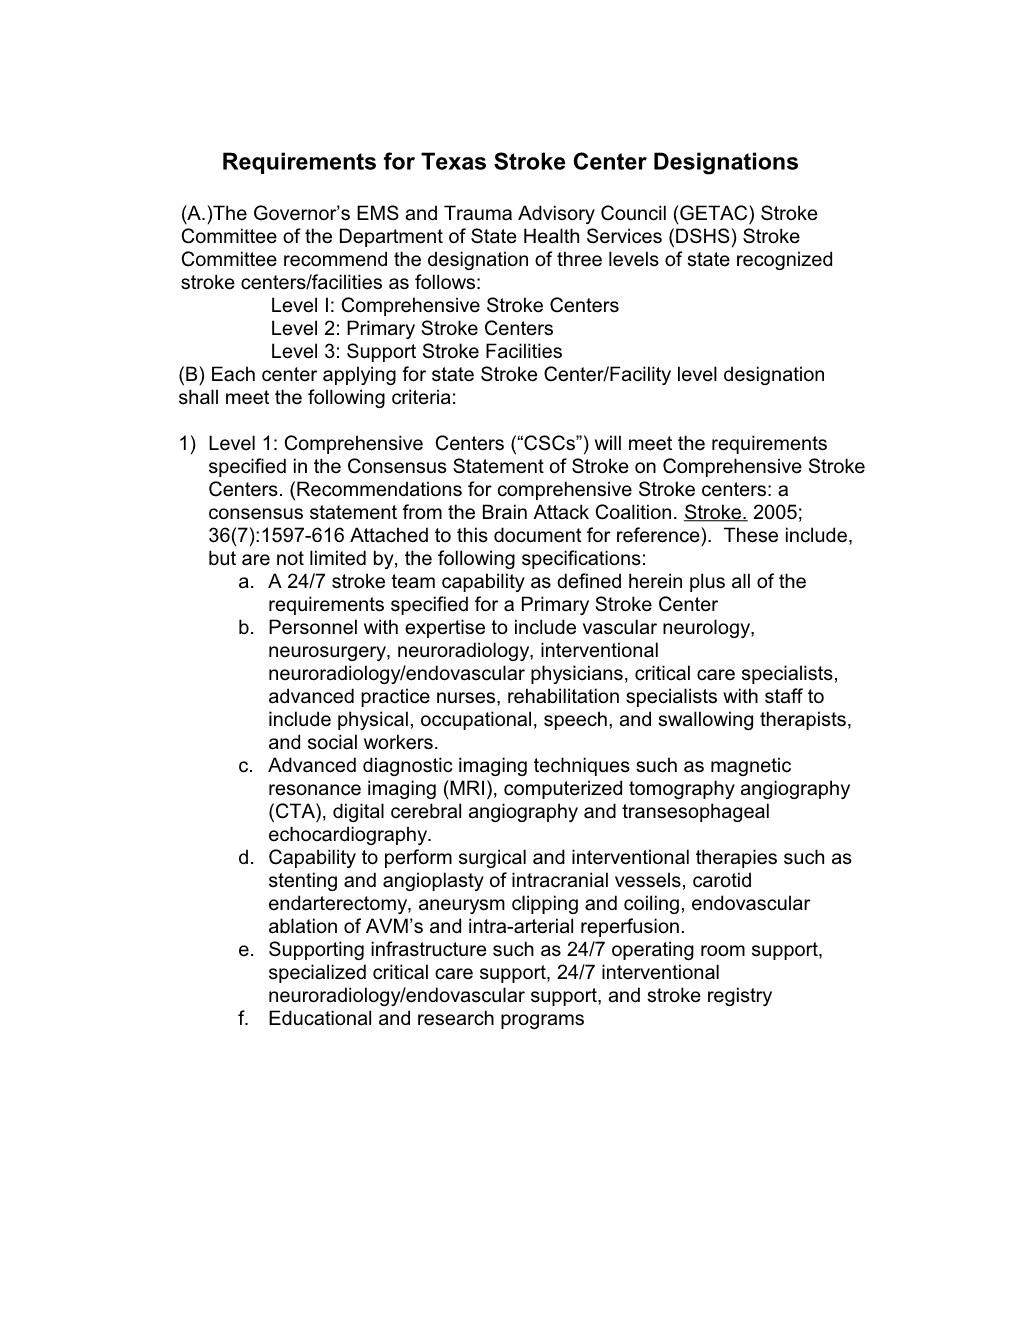 Requirements for Texas Stroke Center Designations